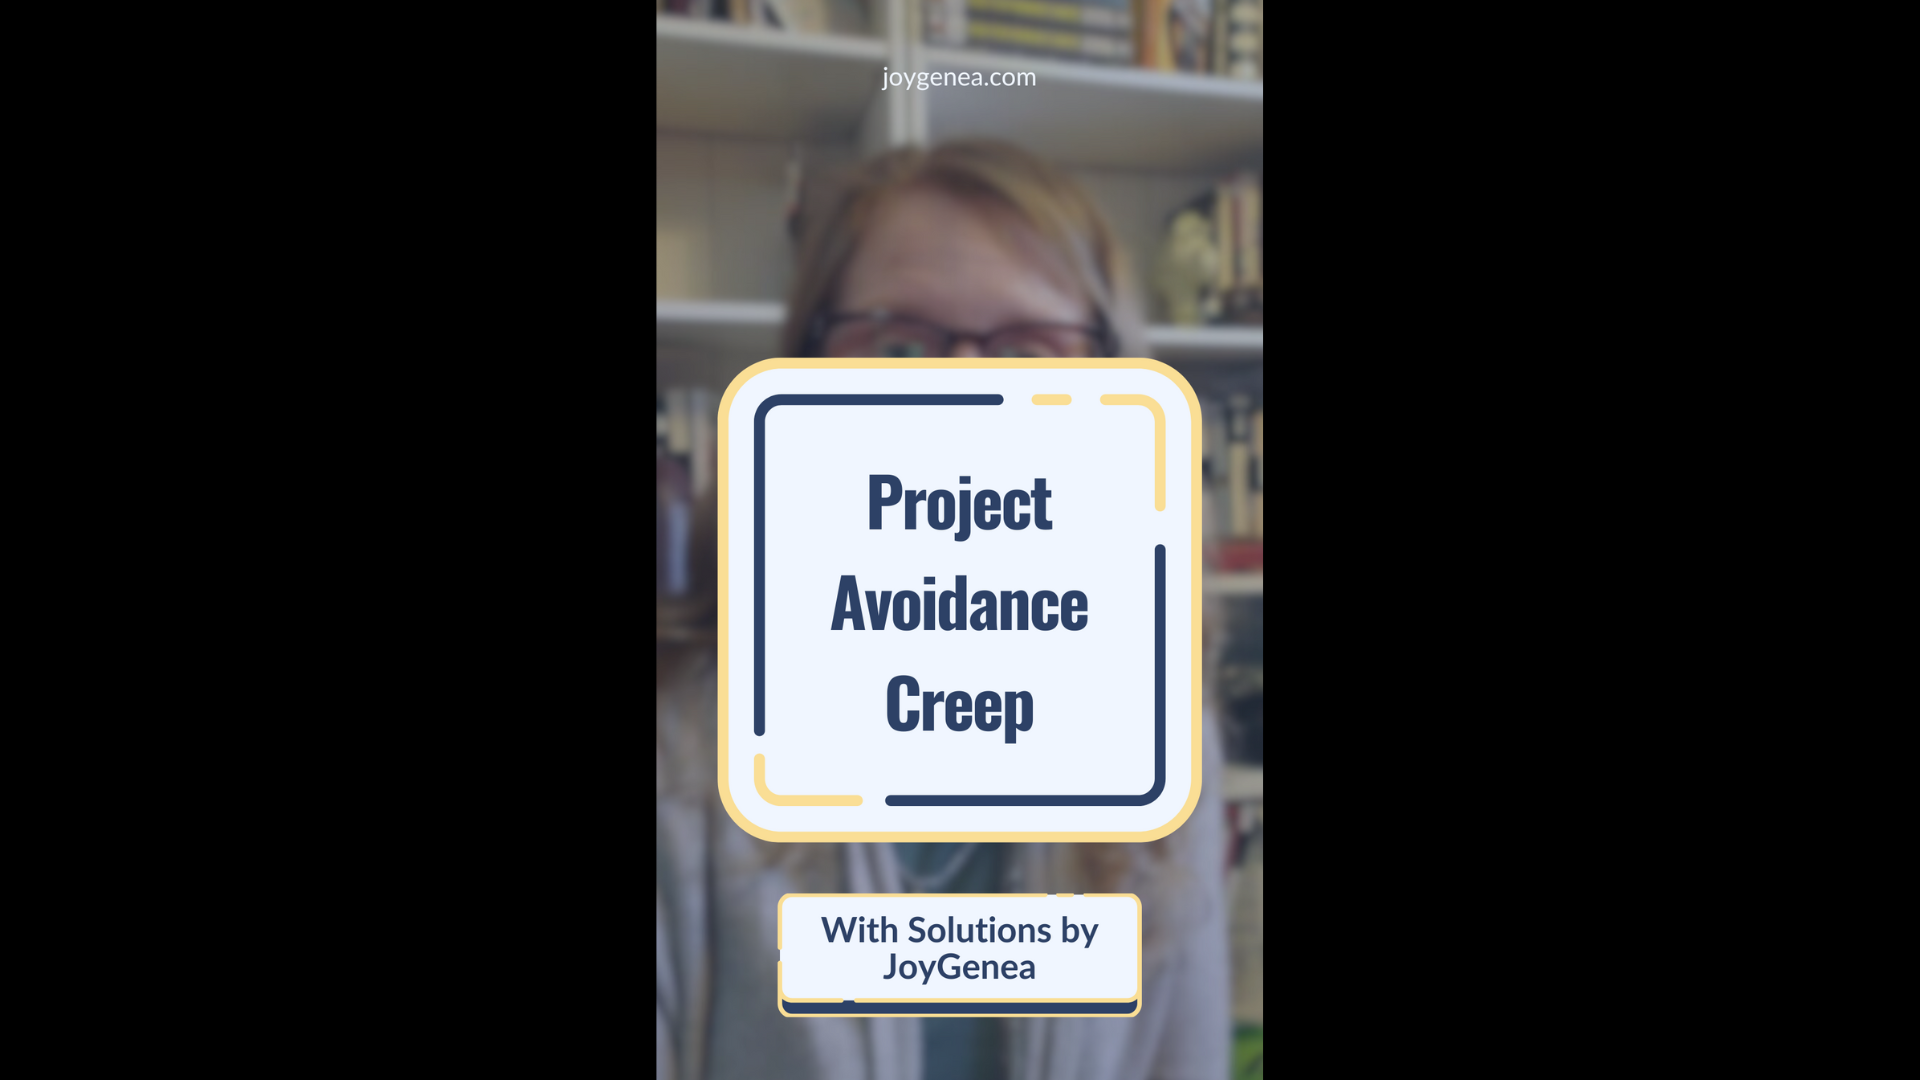 Featured image for “Project Avoidance Creep”